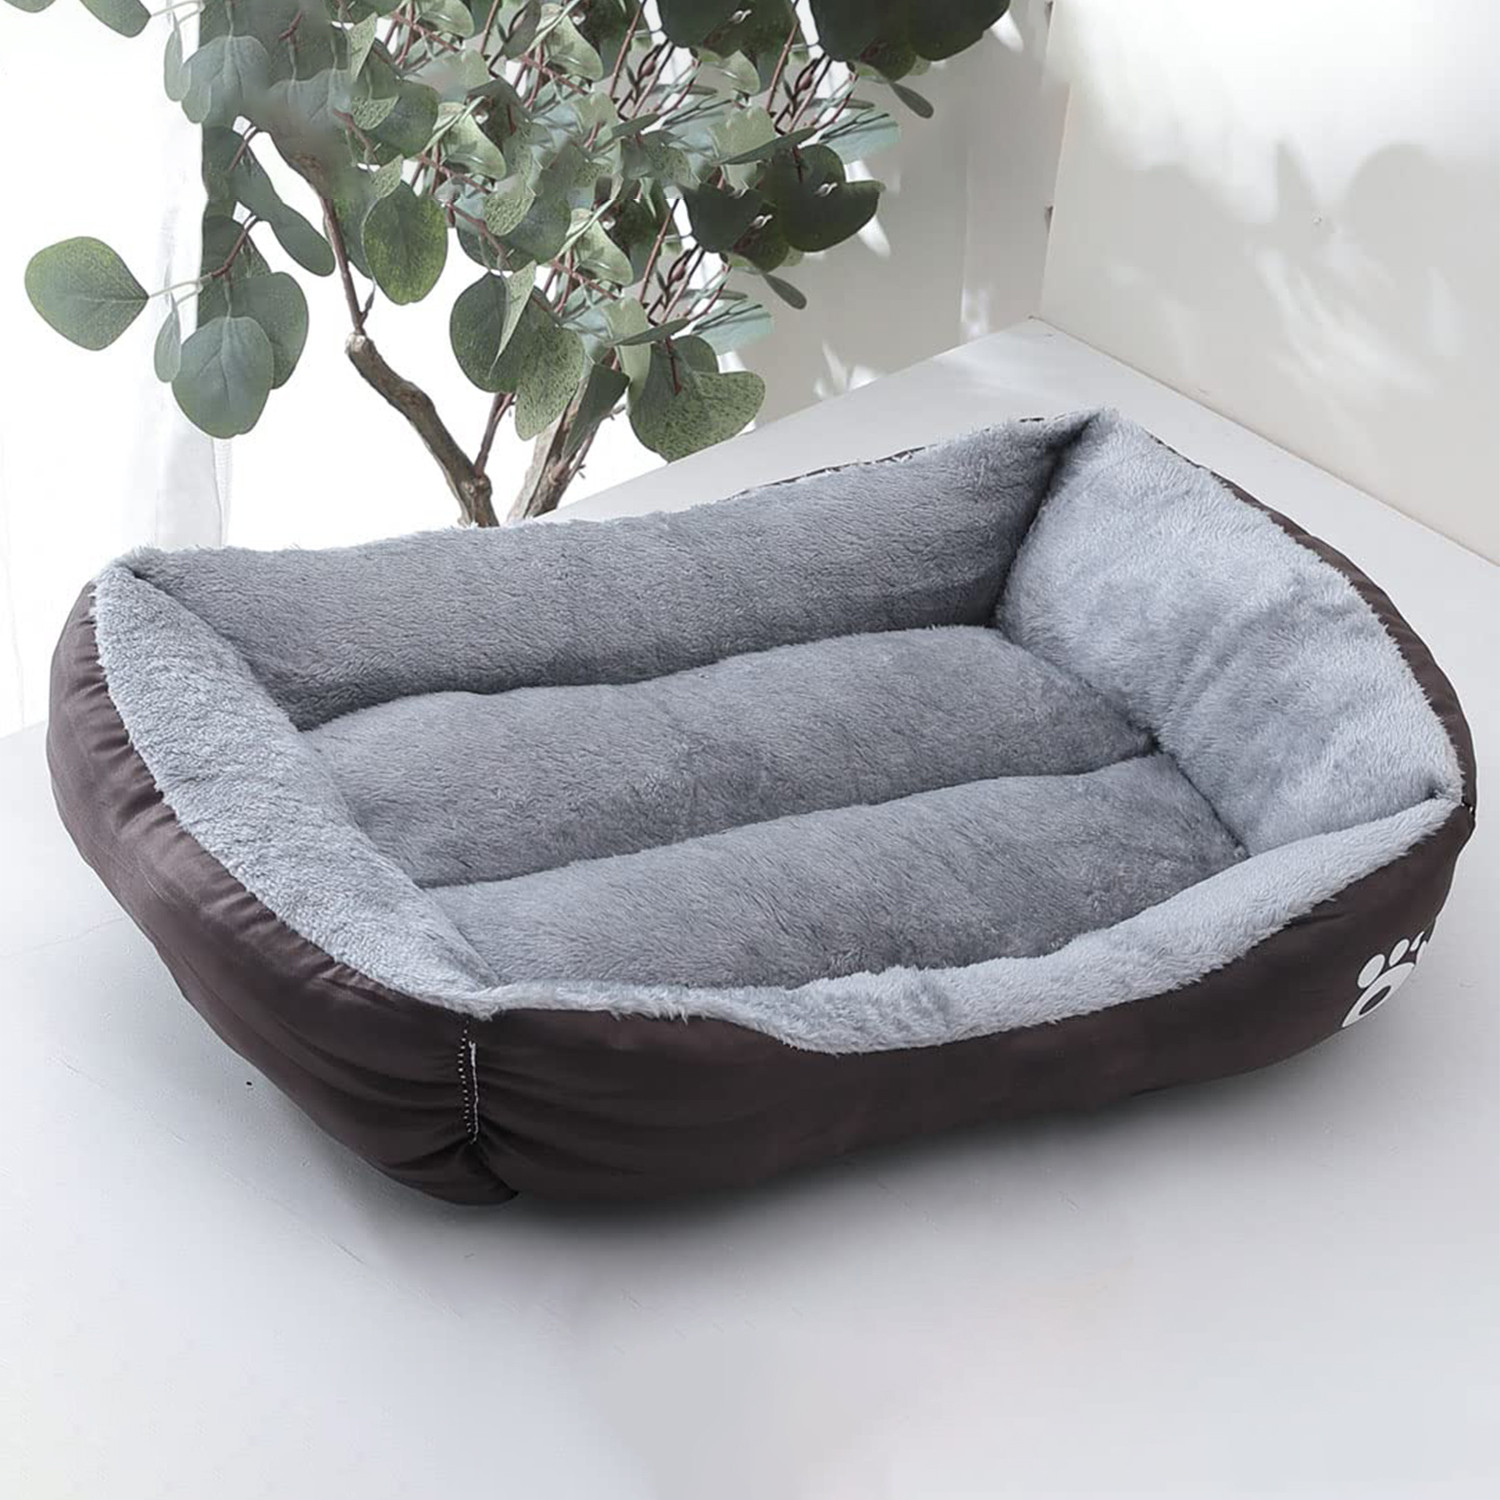 Kuber Industries Dog & Cat Bed|Polyester Face with Cotton & Polyester Filling|Comfortable and Durable|Rectangle Pet Bed for Enhanced Stretching Space|Machine Wash|QY036BR-S|Brown